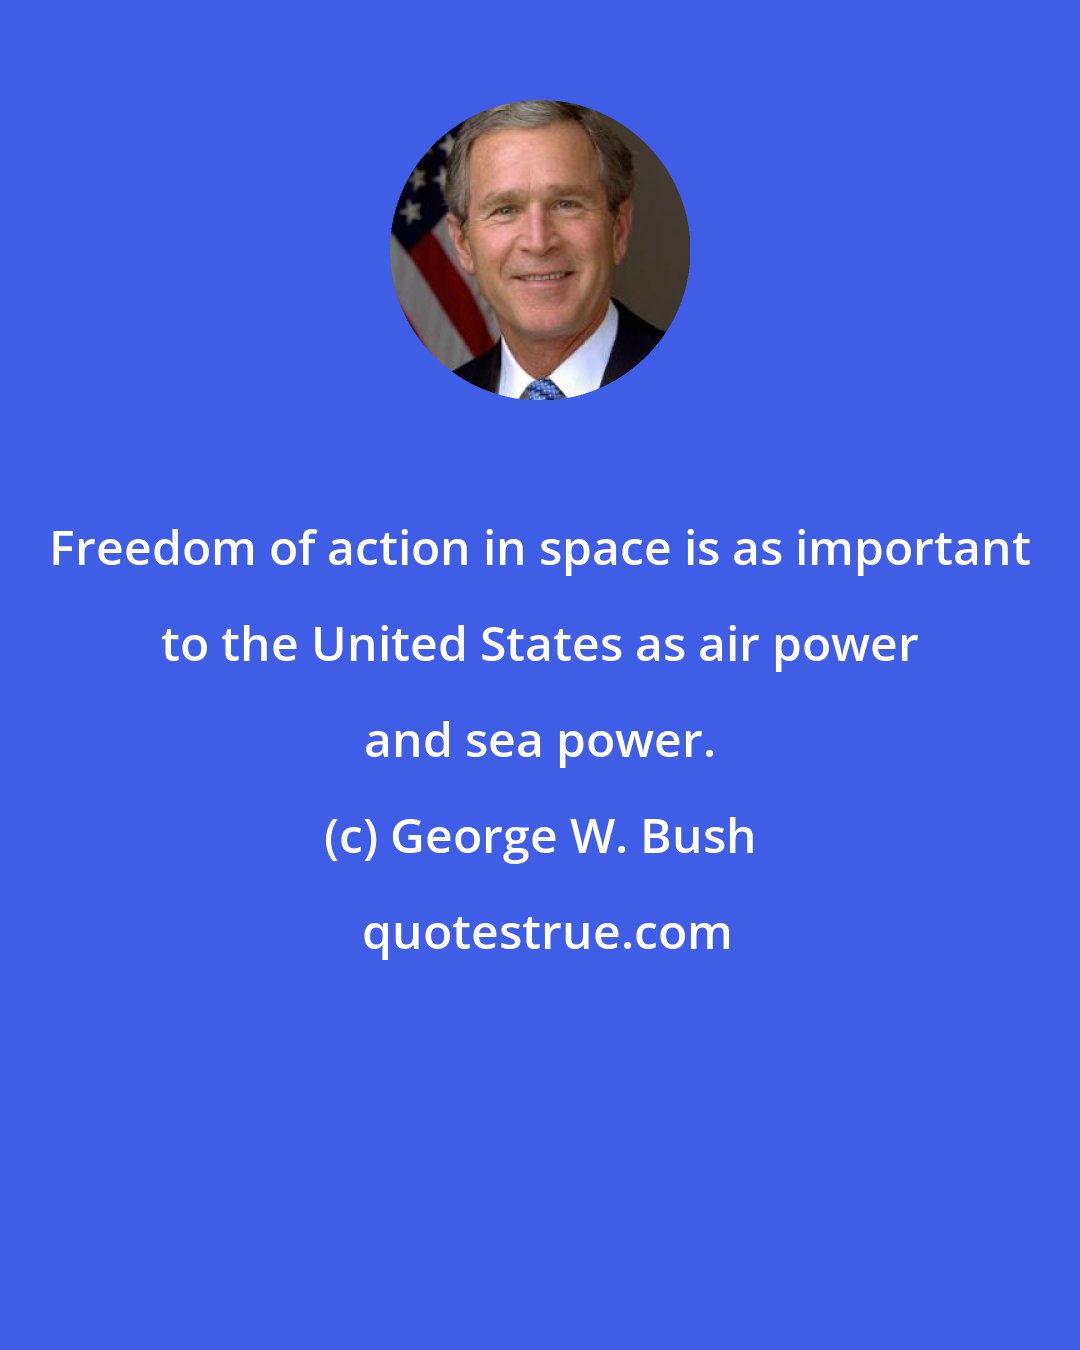 George W. Bush: Freedom of action in space is as important to the United States as air power and sea power.